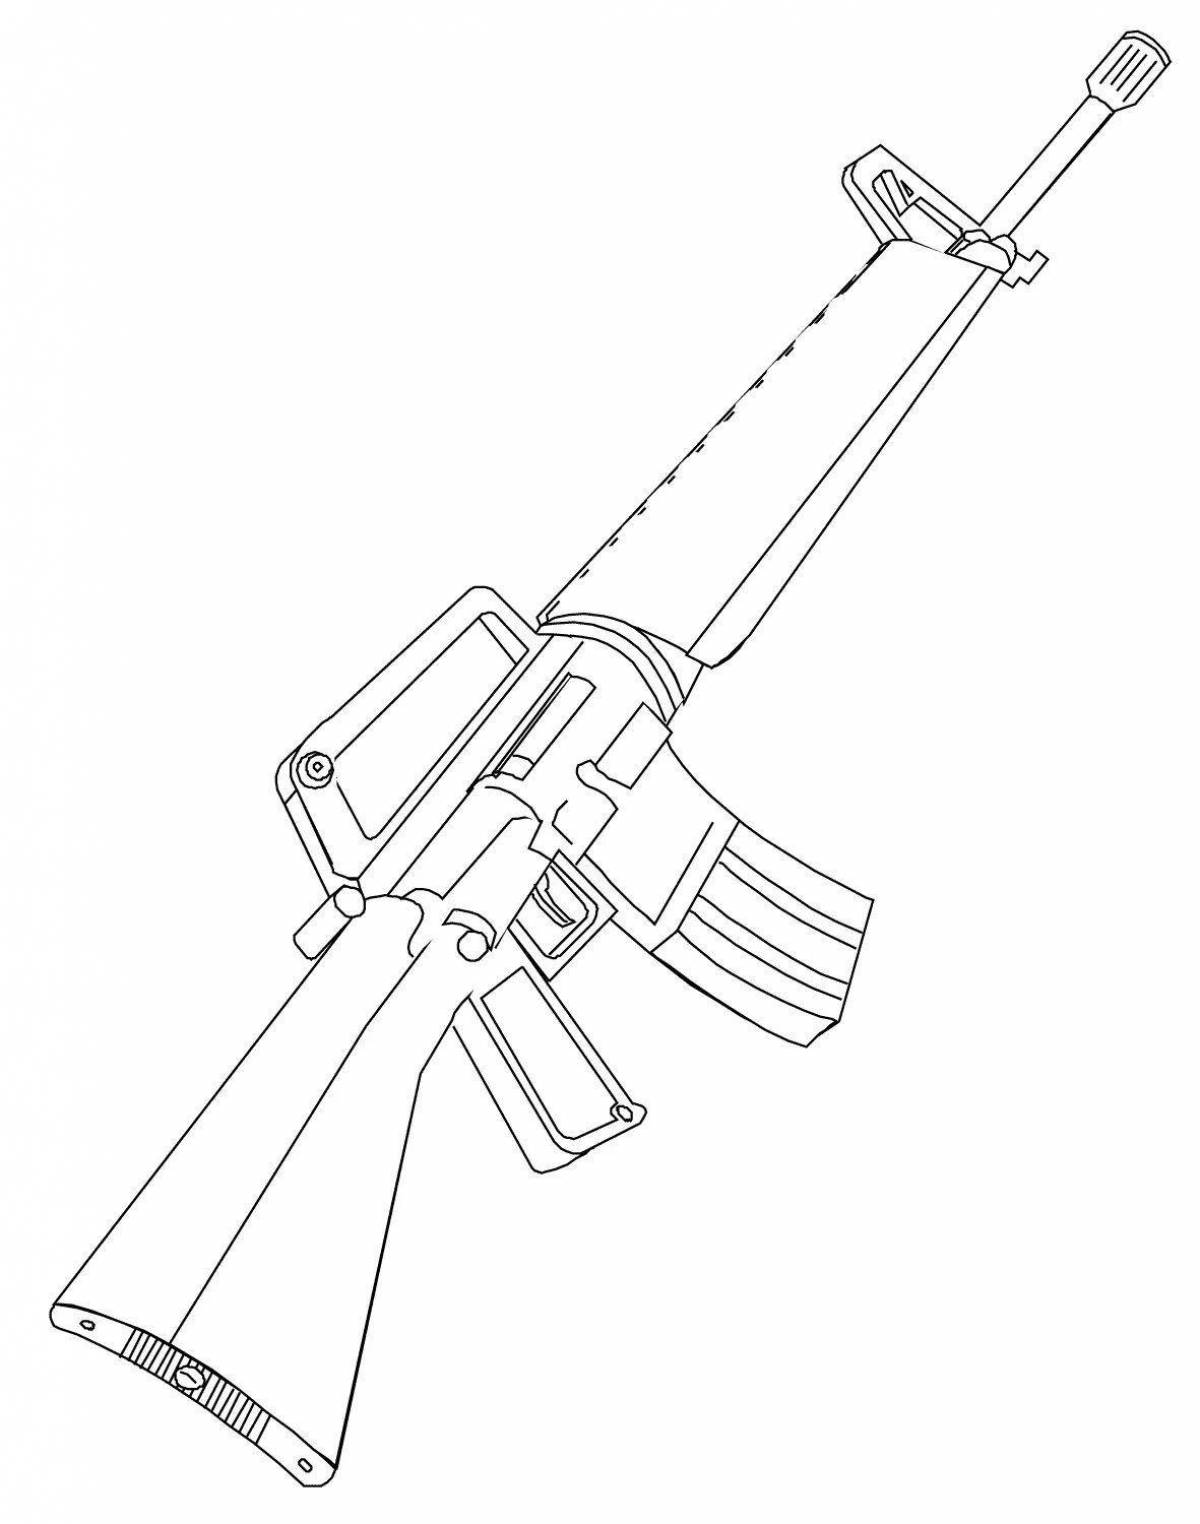 Exquisite weapons coloring page